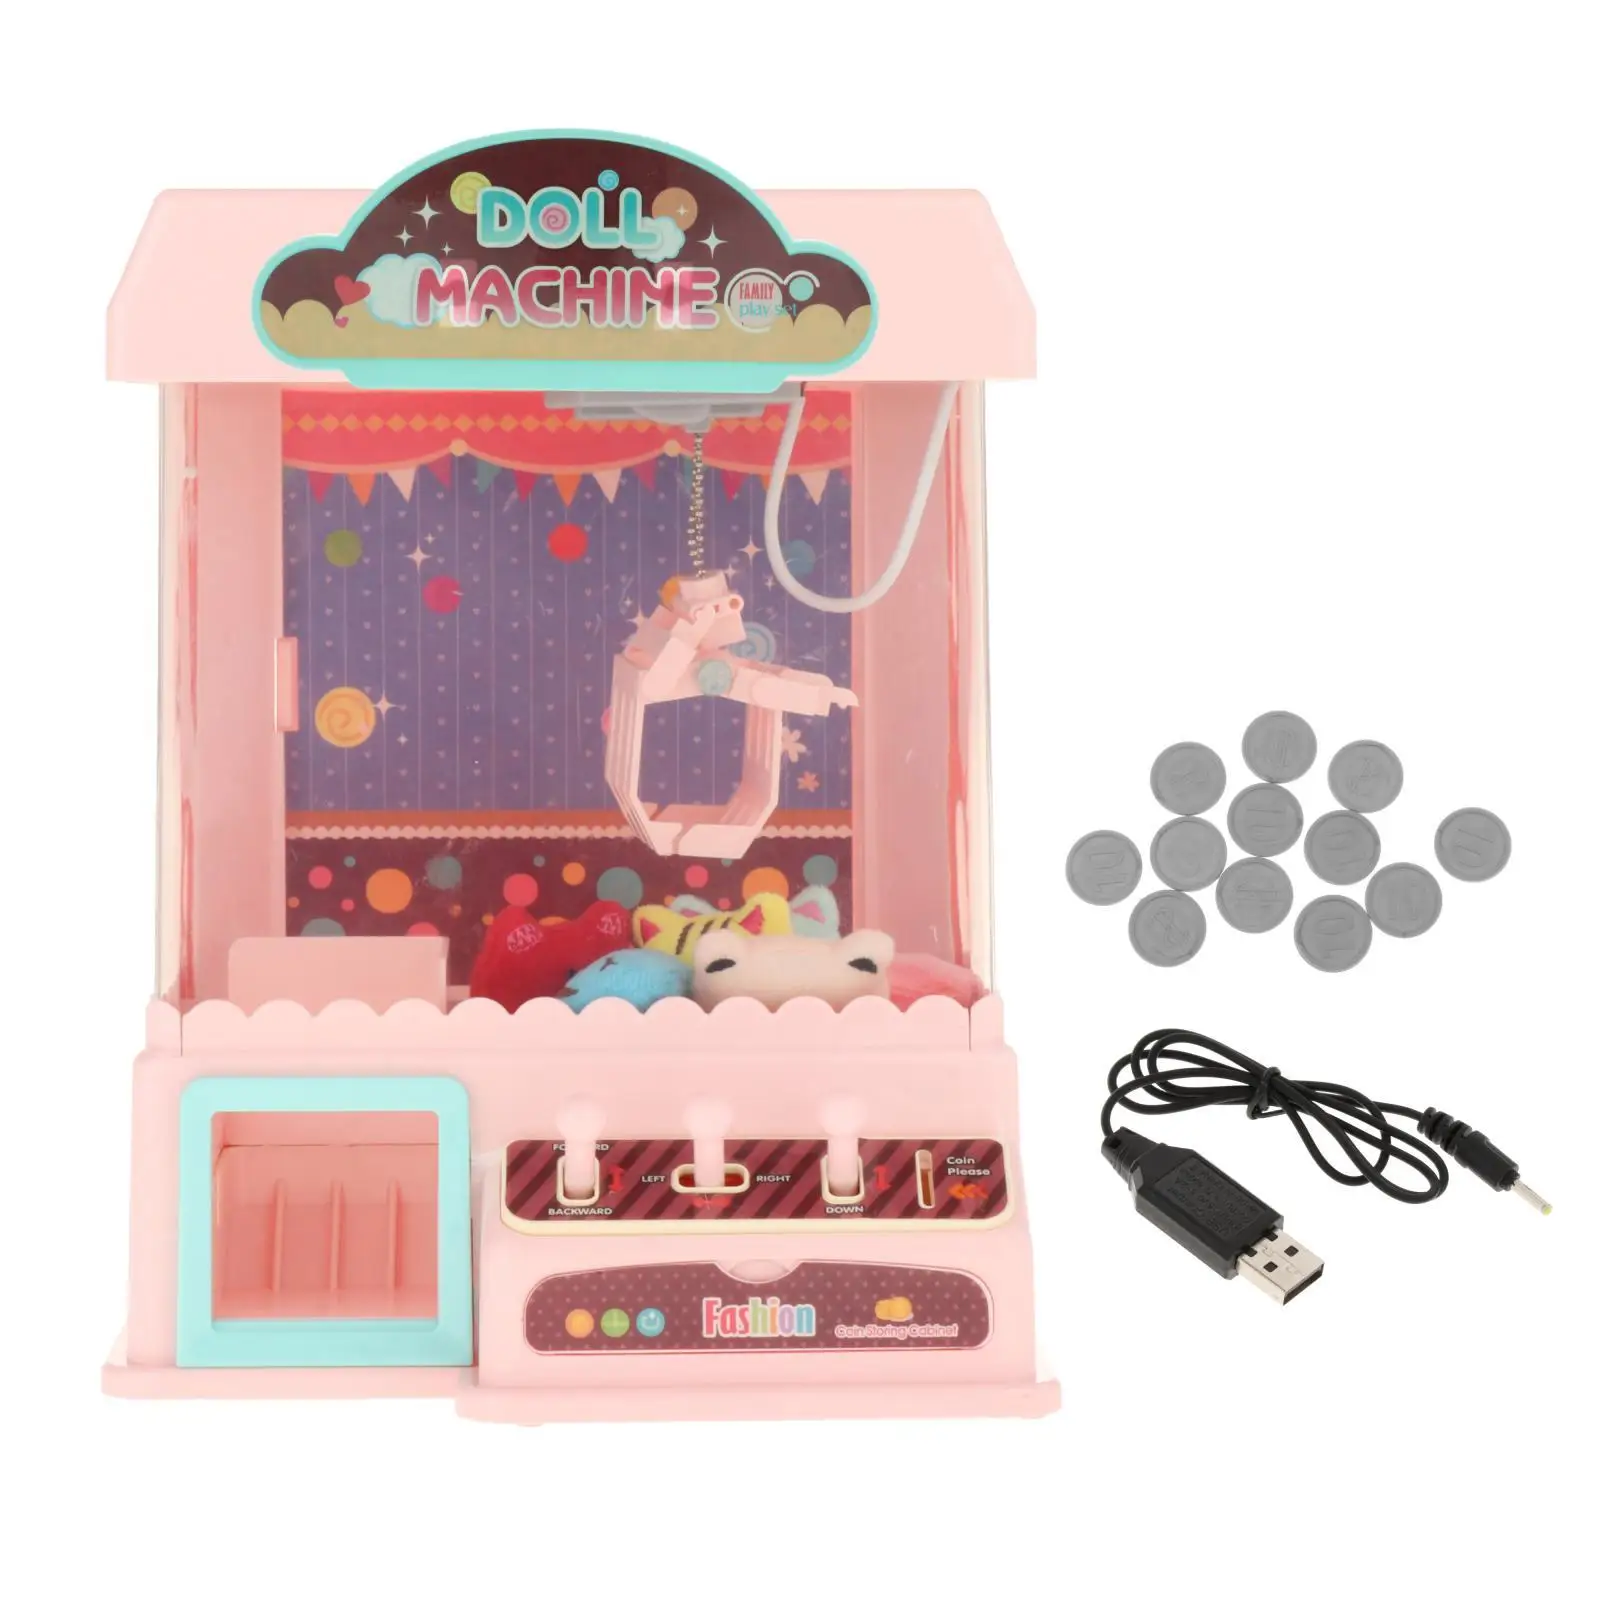 DIY Electric Claw Machine with Lights & Sounds Girl Grab Doll Clip and 10 Capsules Mini Arcade Machine for Kids Birthday Gifts